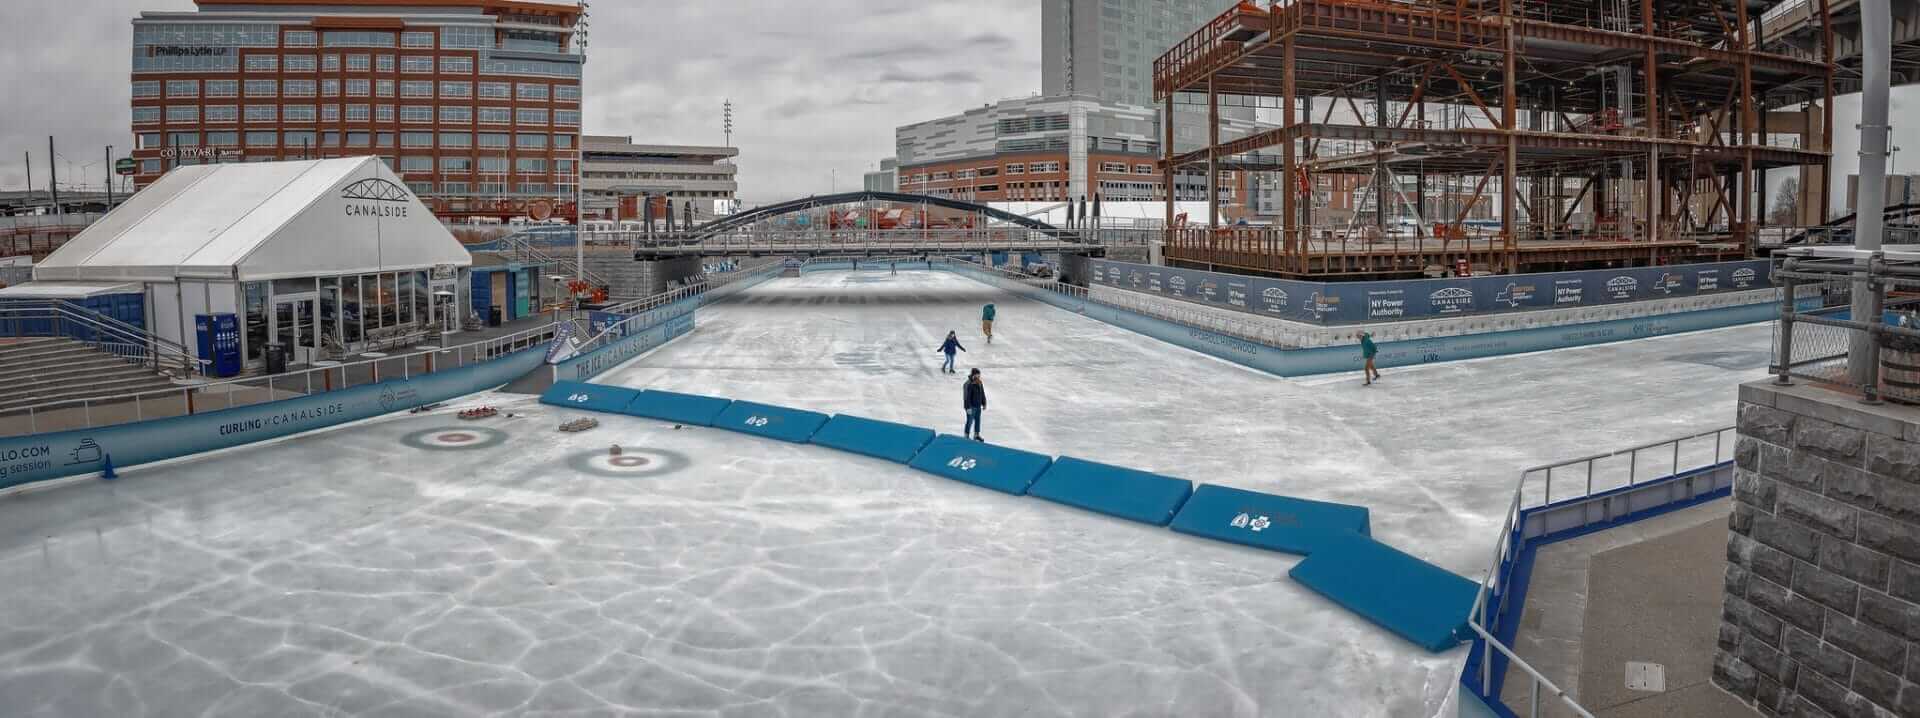 The Ice at Canalside (Buffalo, New York). Photo Credit: Ken Lane